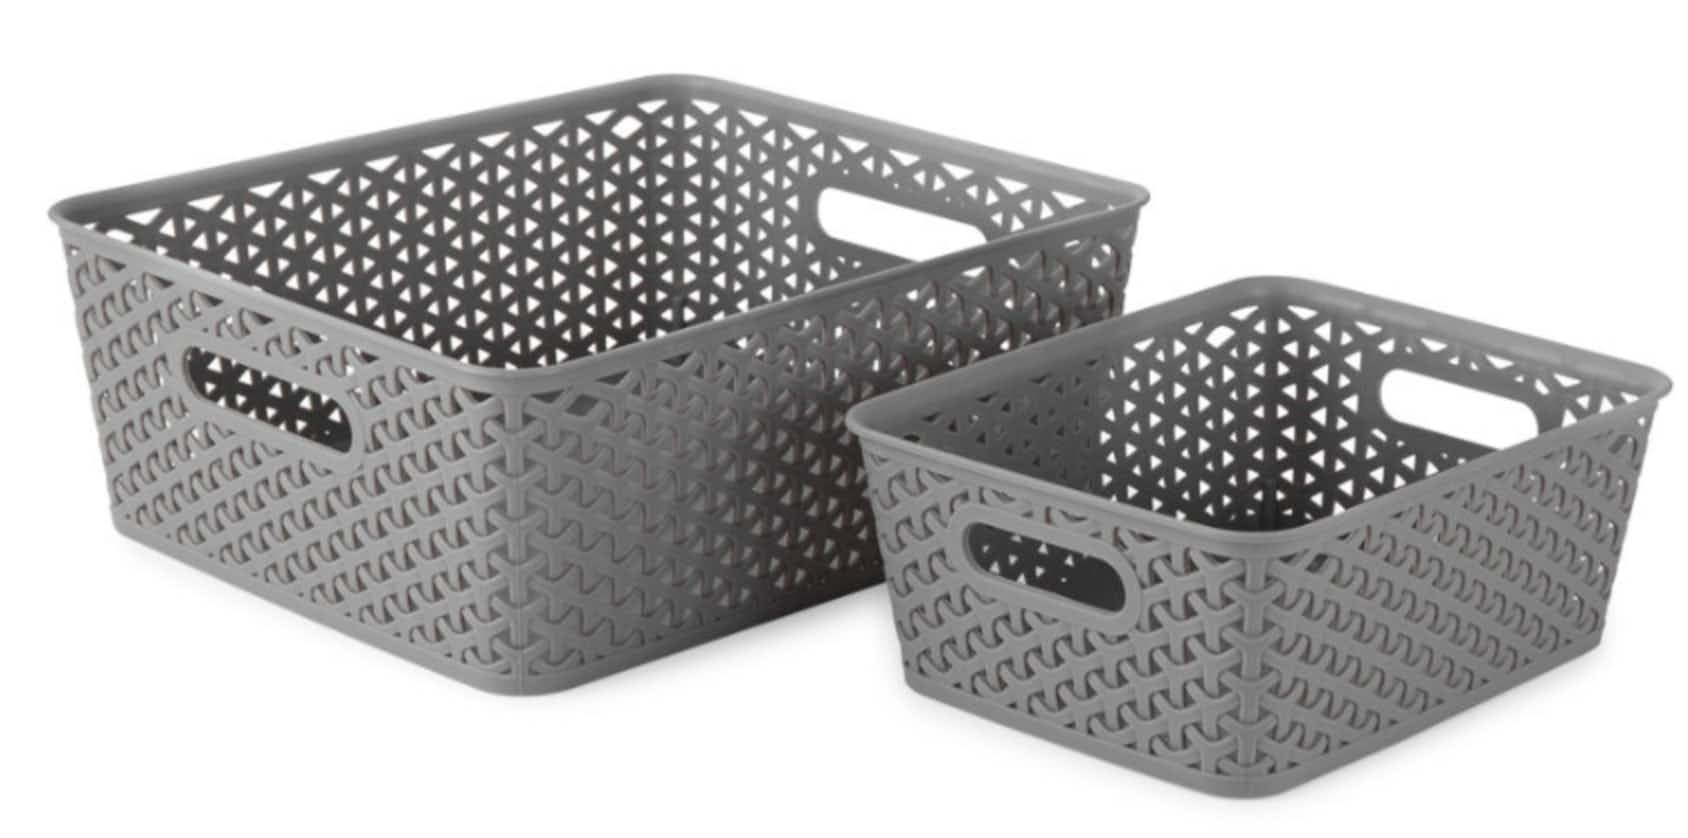 a large and medium plastic grey woven baskets